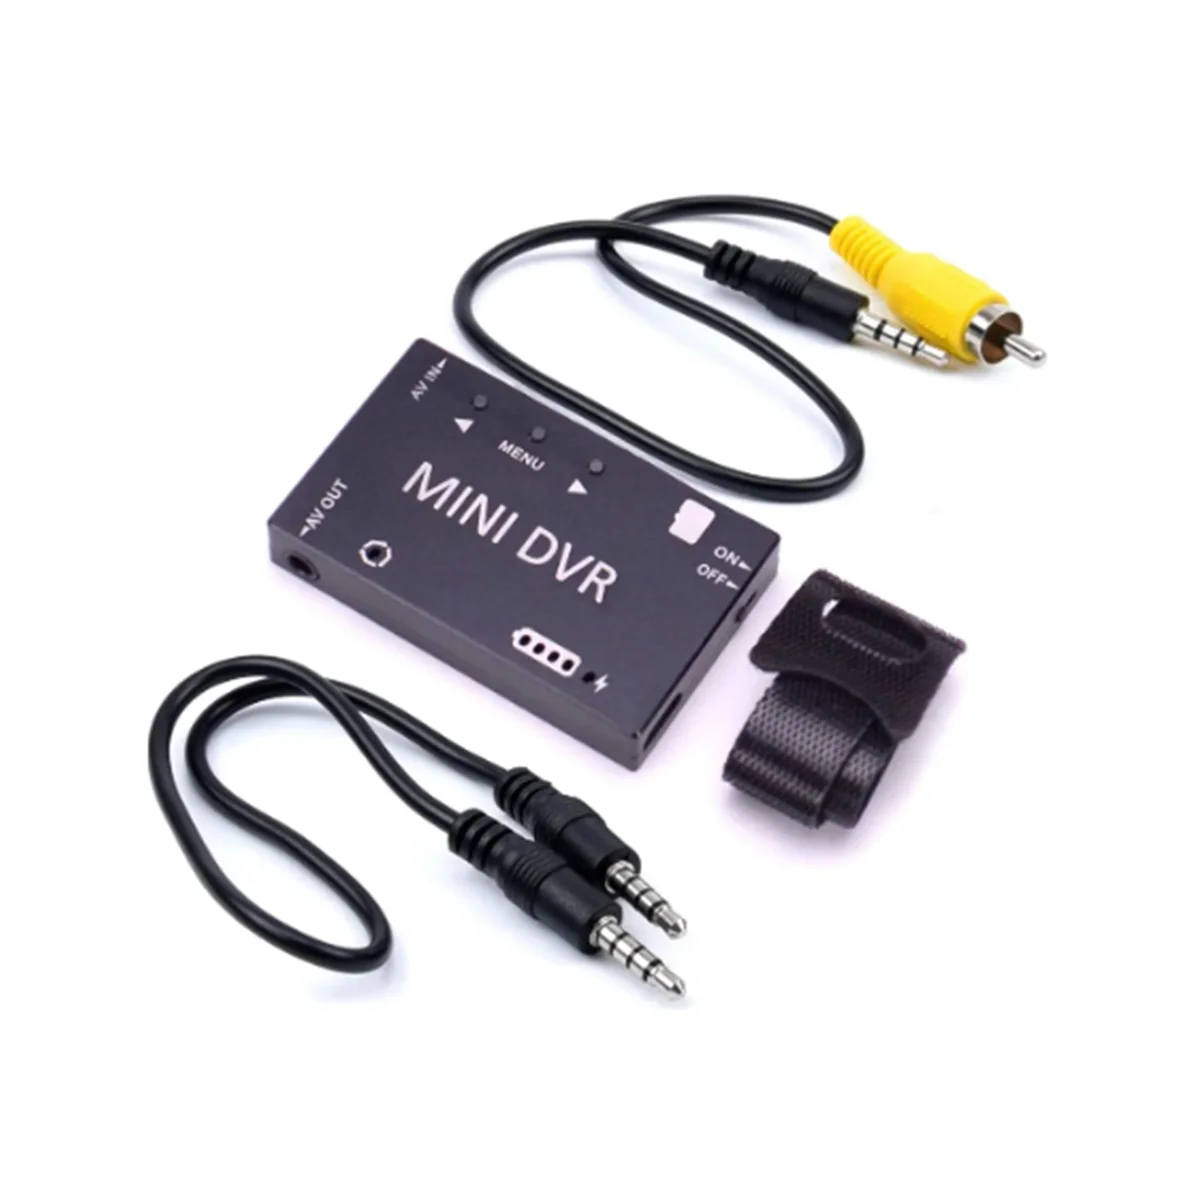 

FPV Recorder Mini FPV DVR Module NTSC/PAL Switchable Built-in Battery Video Audio FPV Recorder for RC Models Racing(A)